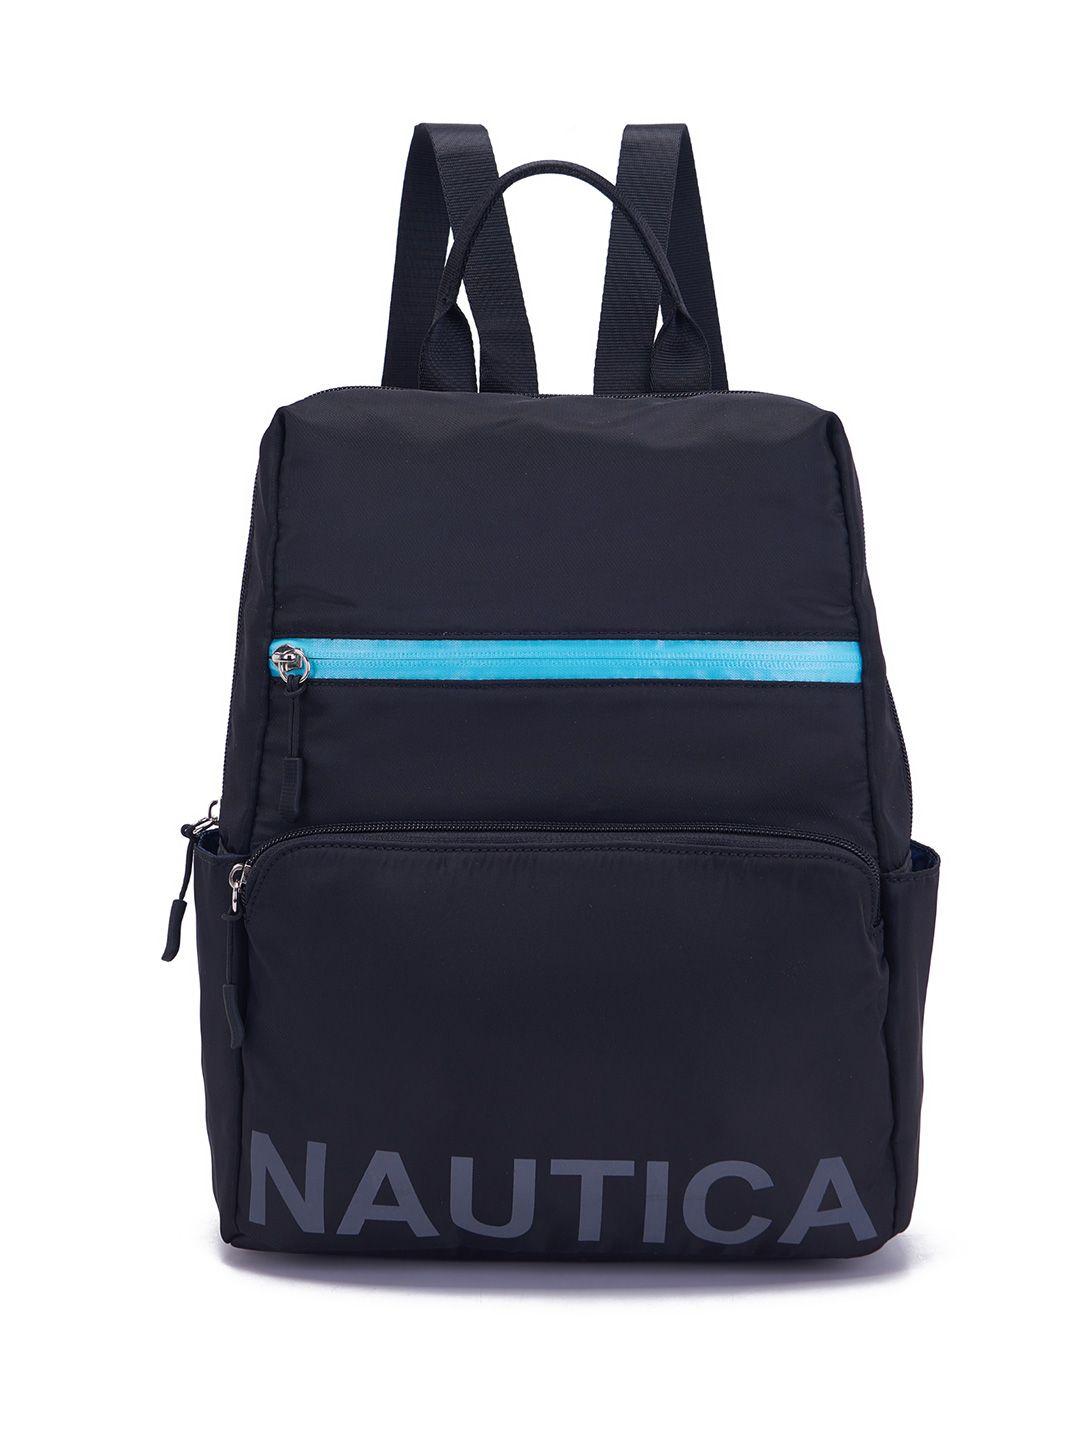 nautica typography printed backpack with adjustable strap